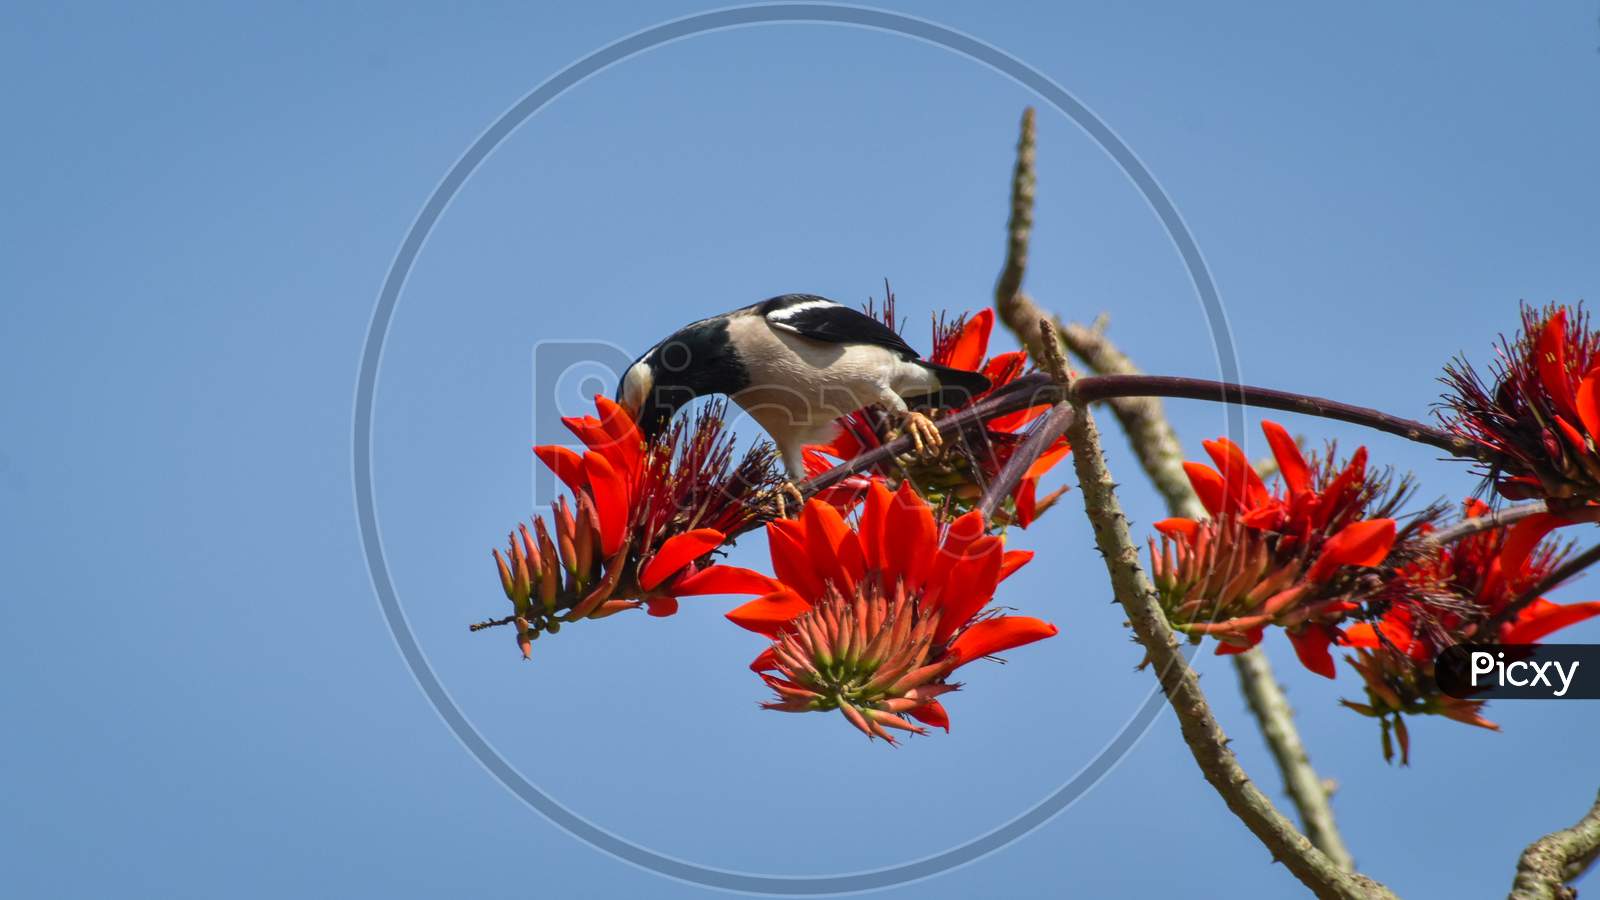 Bird Drinking Honey From The Flower During The Spring Season.